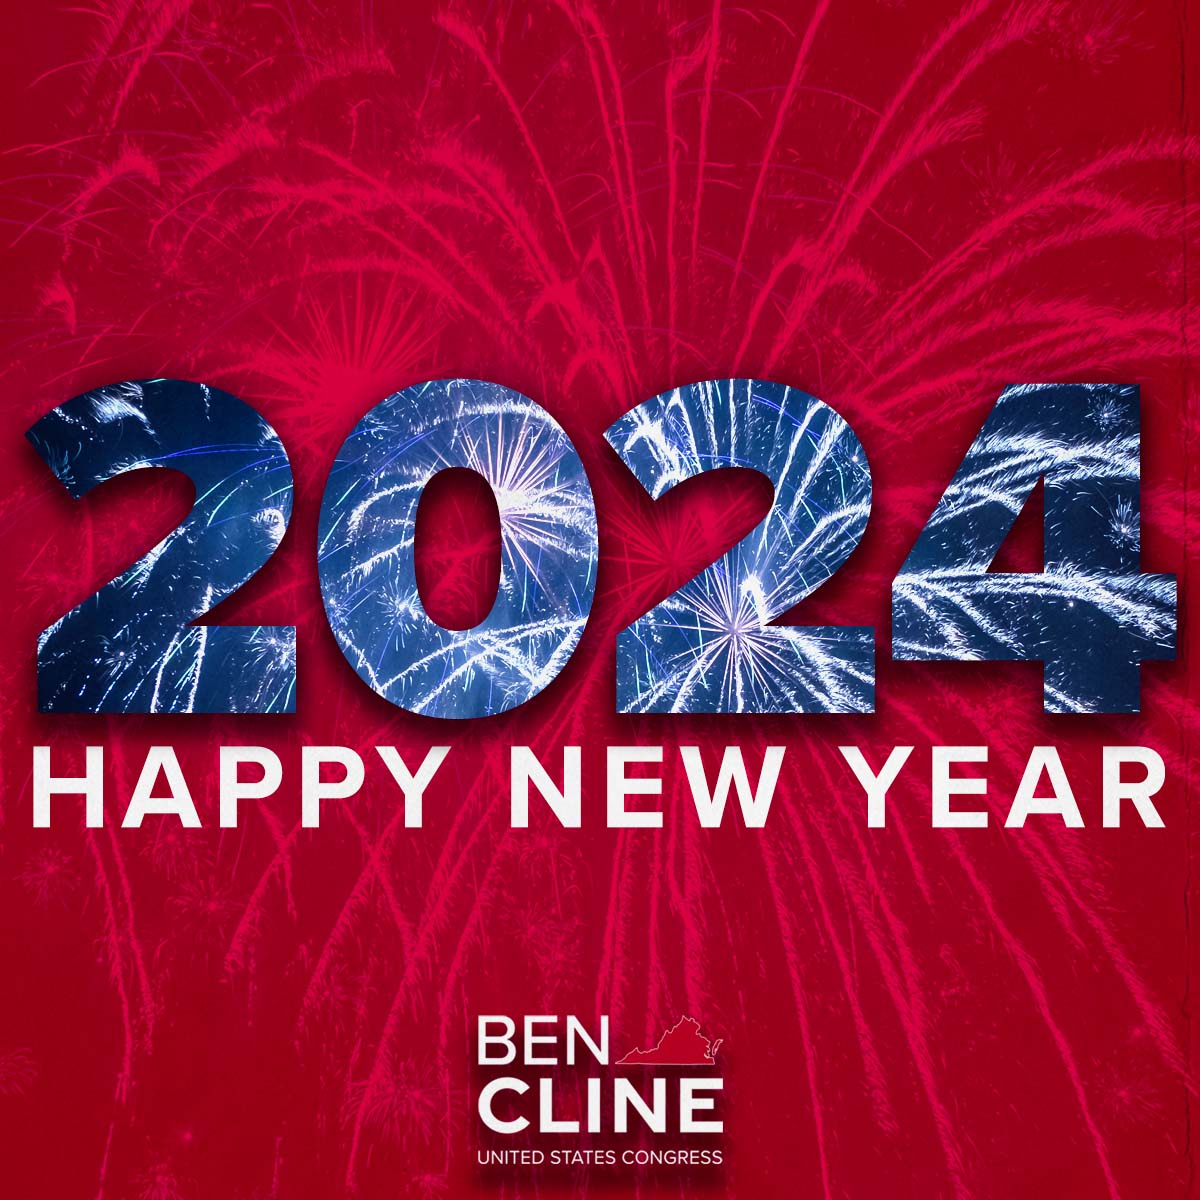 As we bid farewell to a wonderful year, the Cline family wishes you a Happy New Year filled with prosperity and joy!